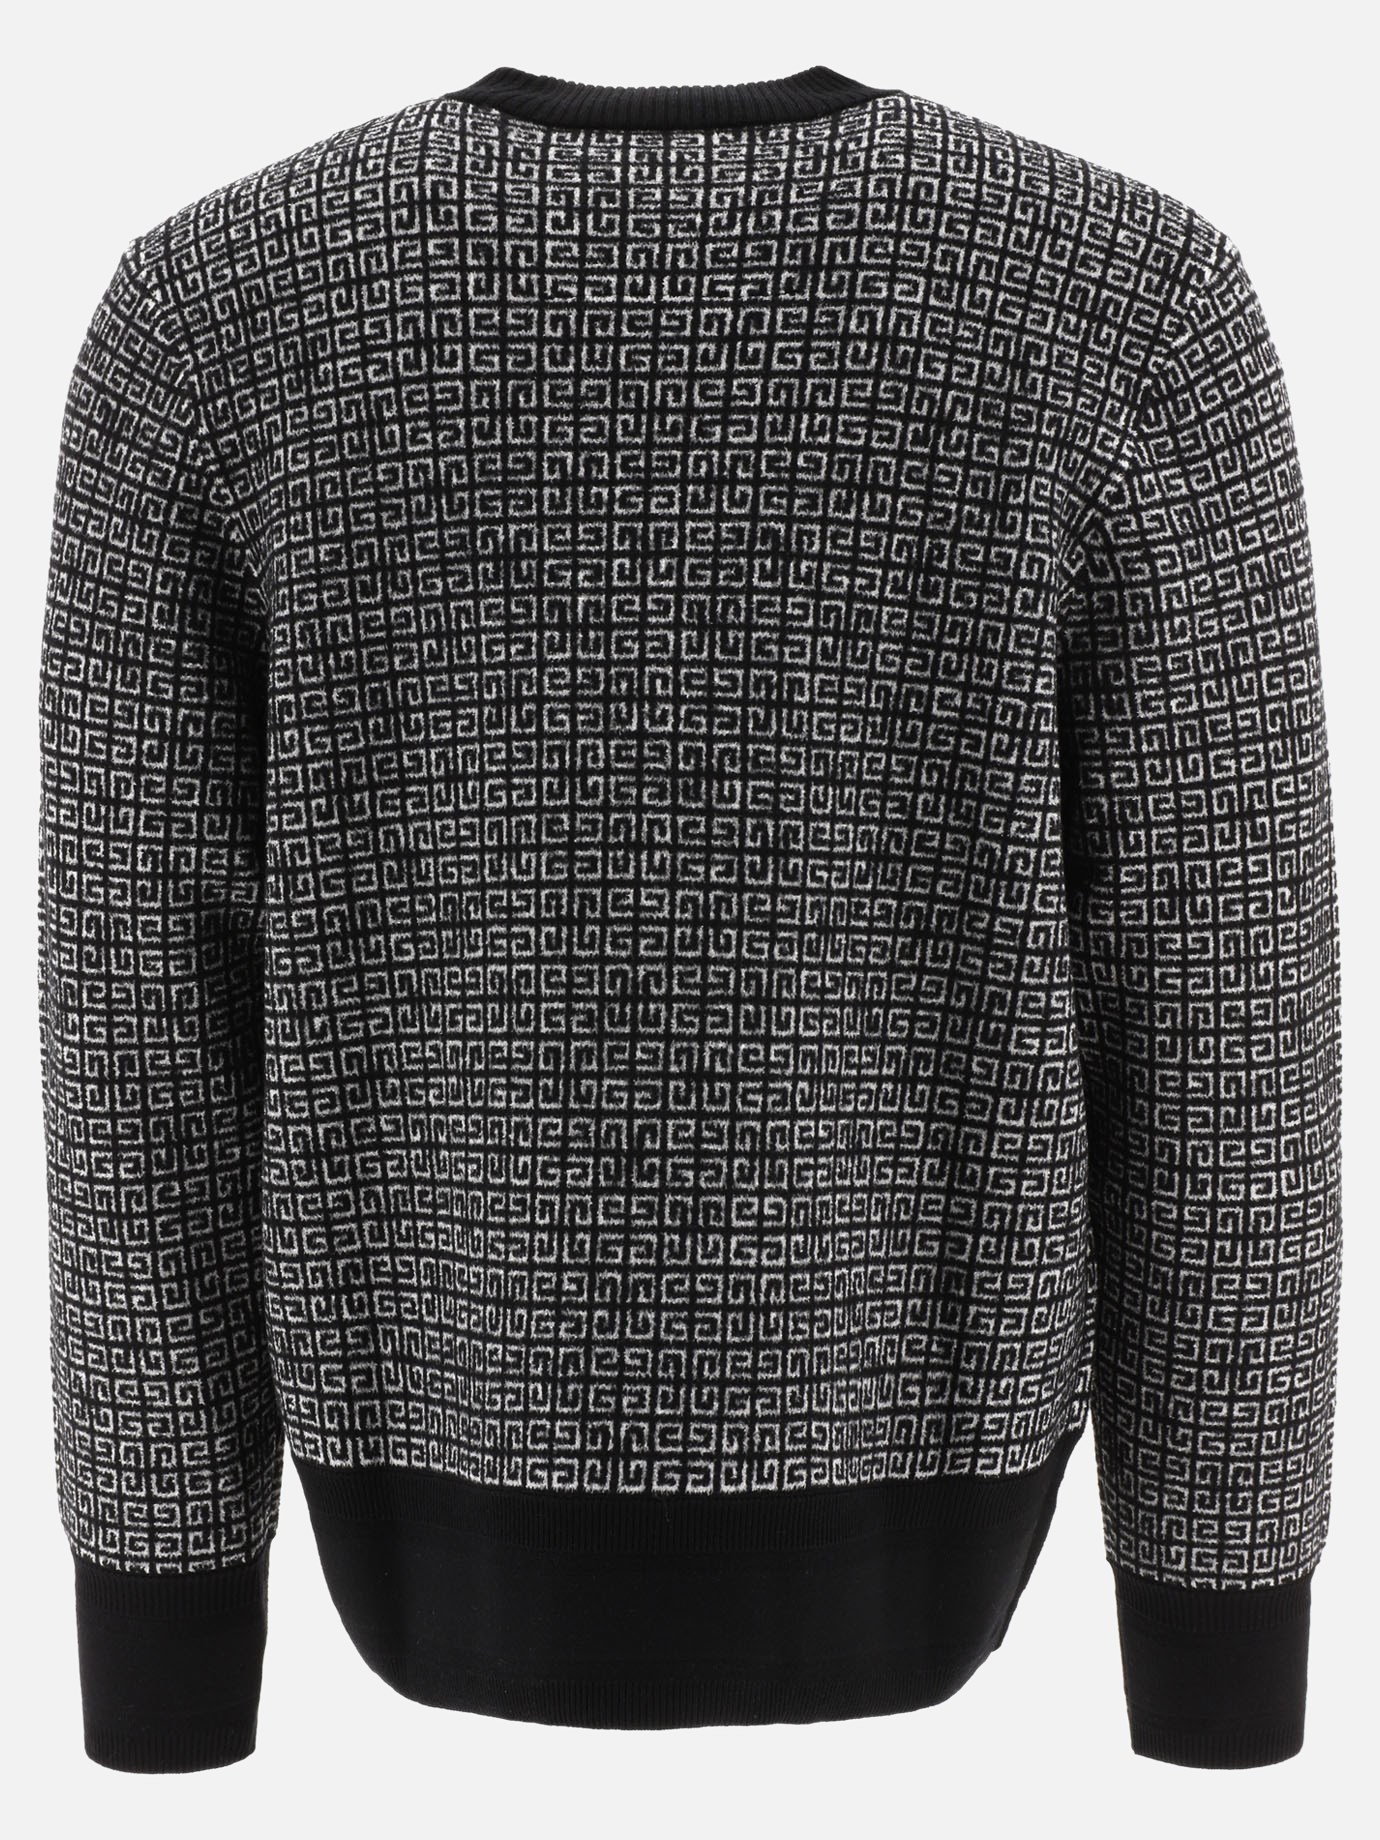  4G  jacquard sweater by Givenchy